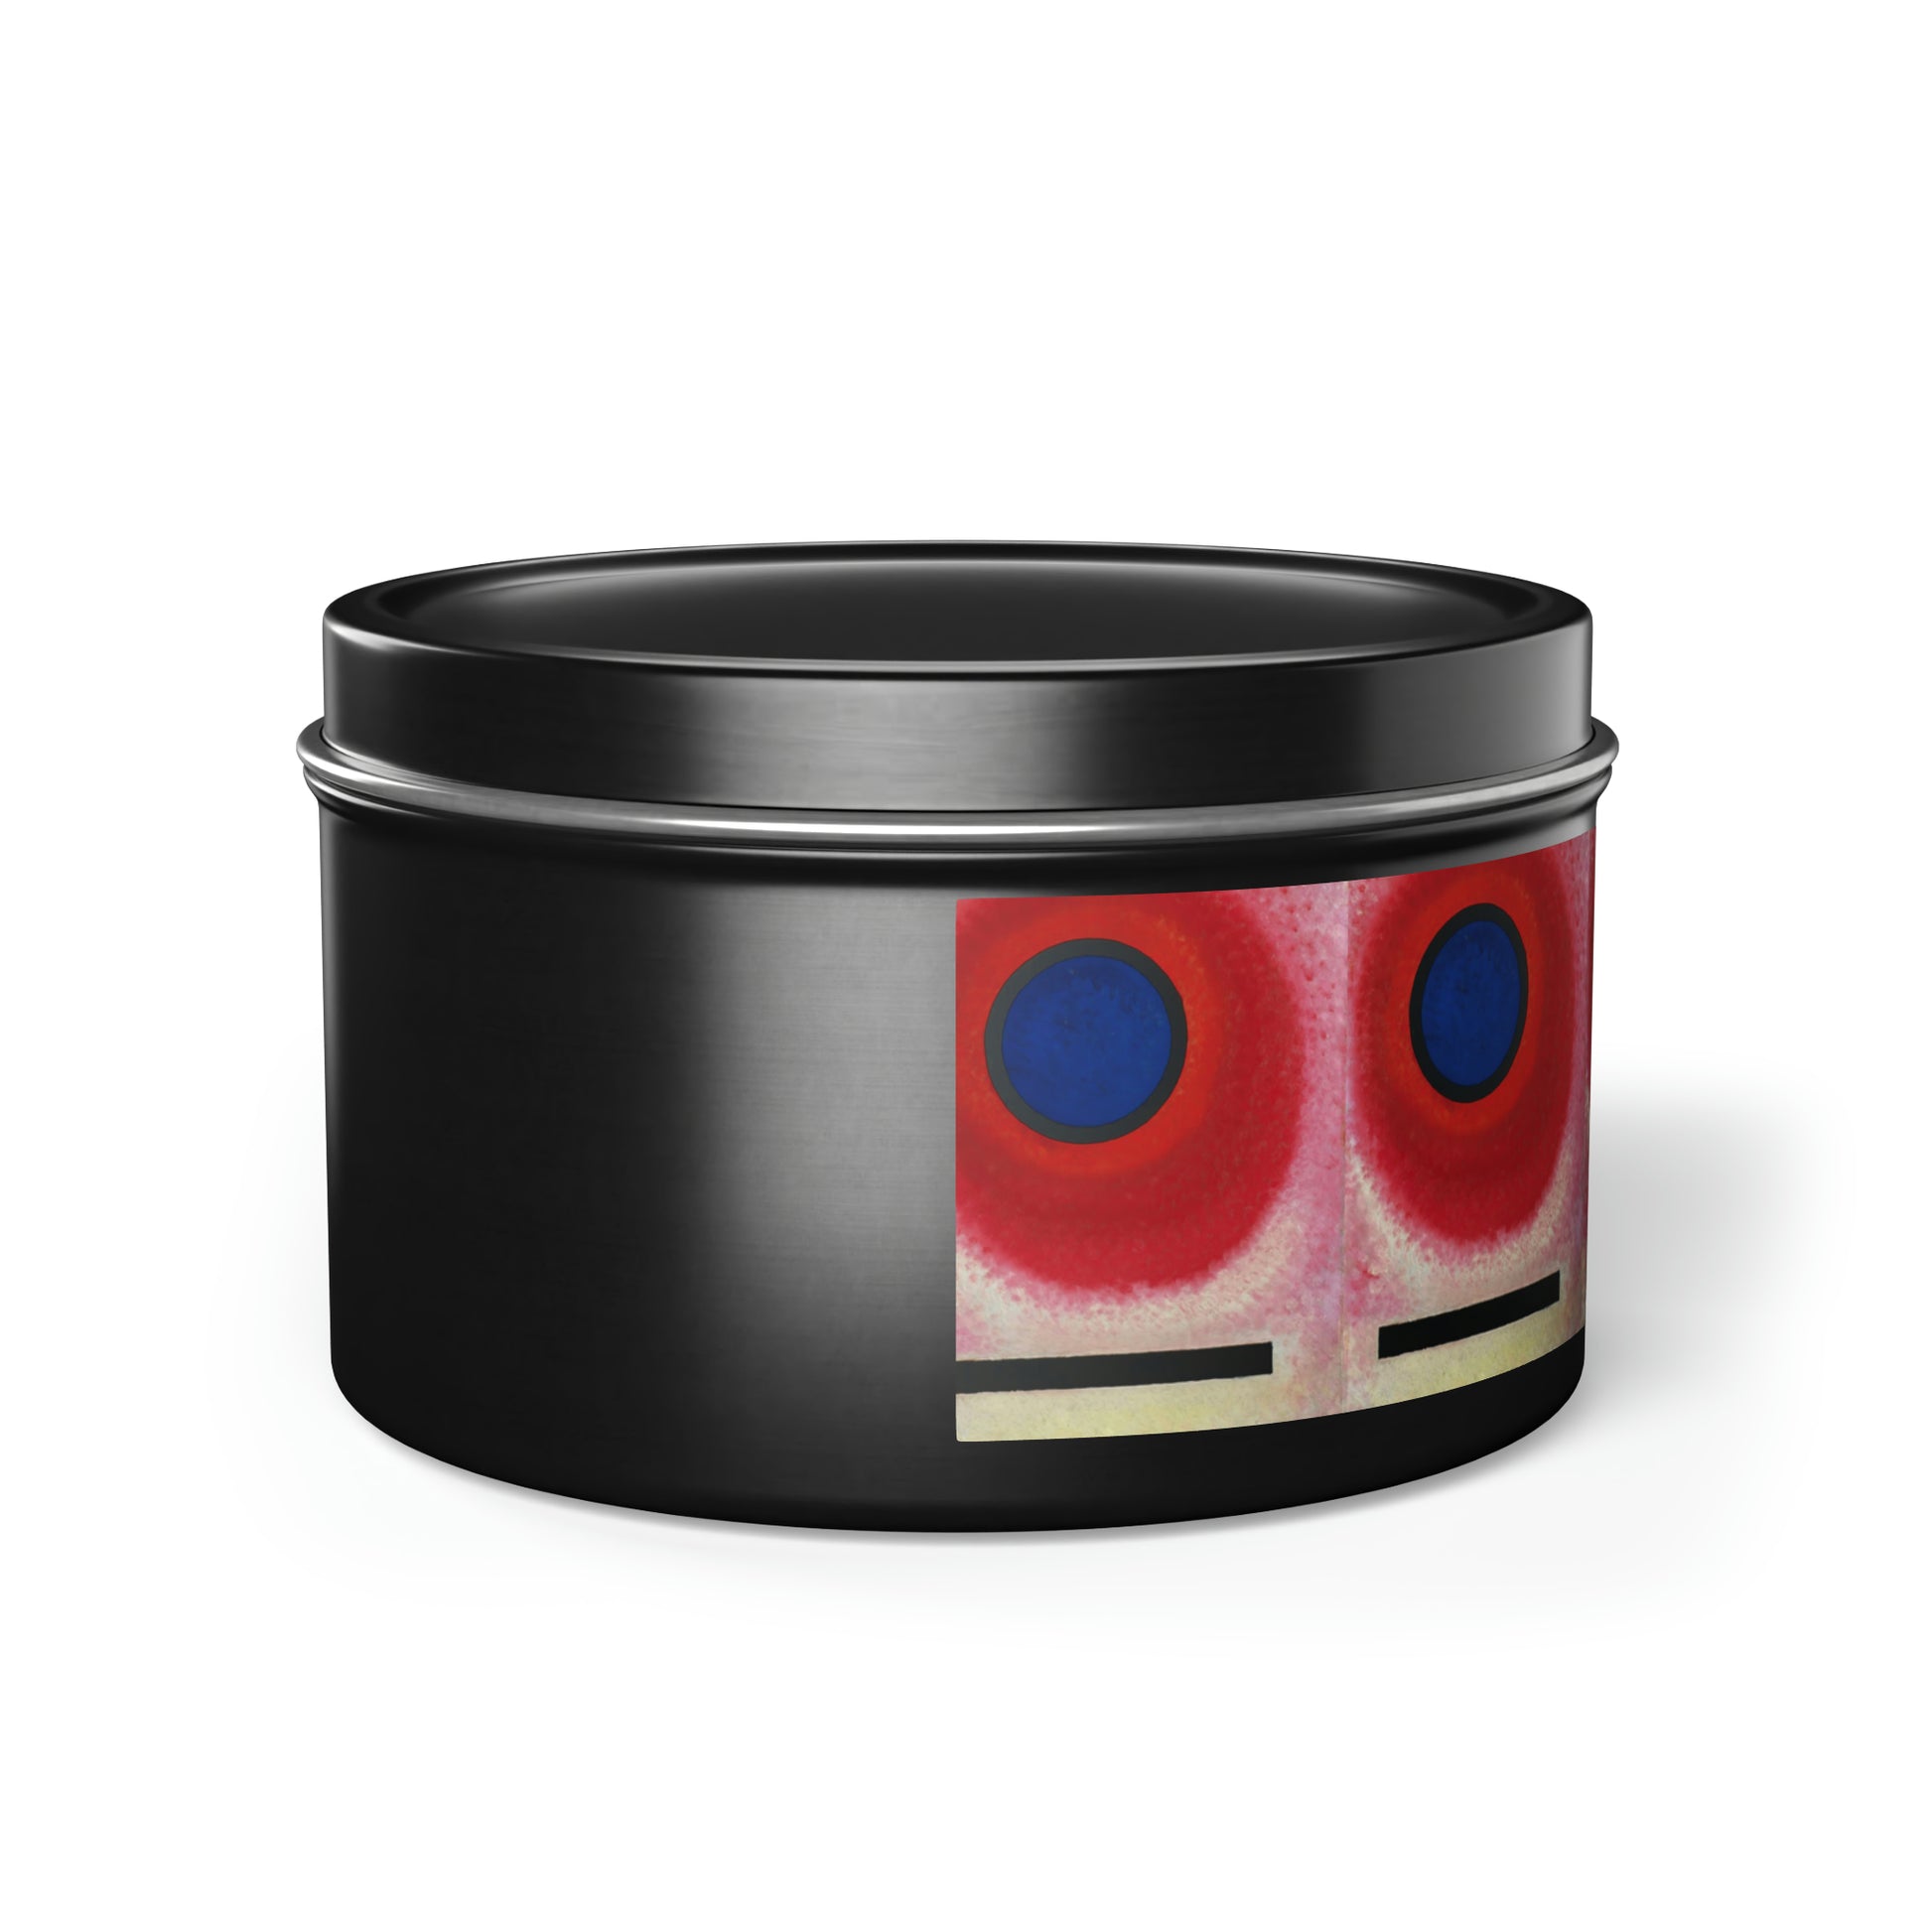 a black container with a red and blue design on it